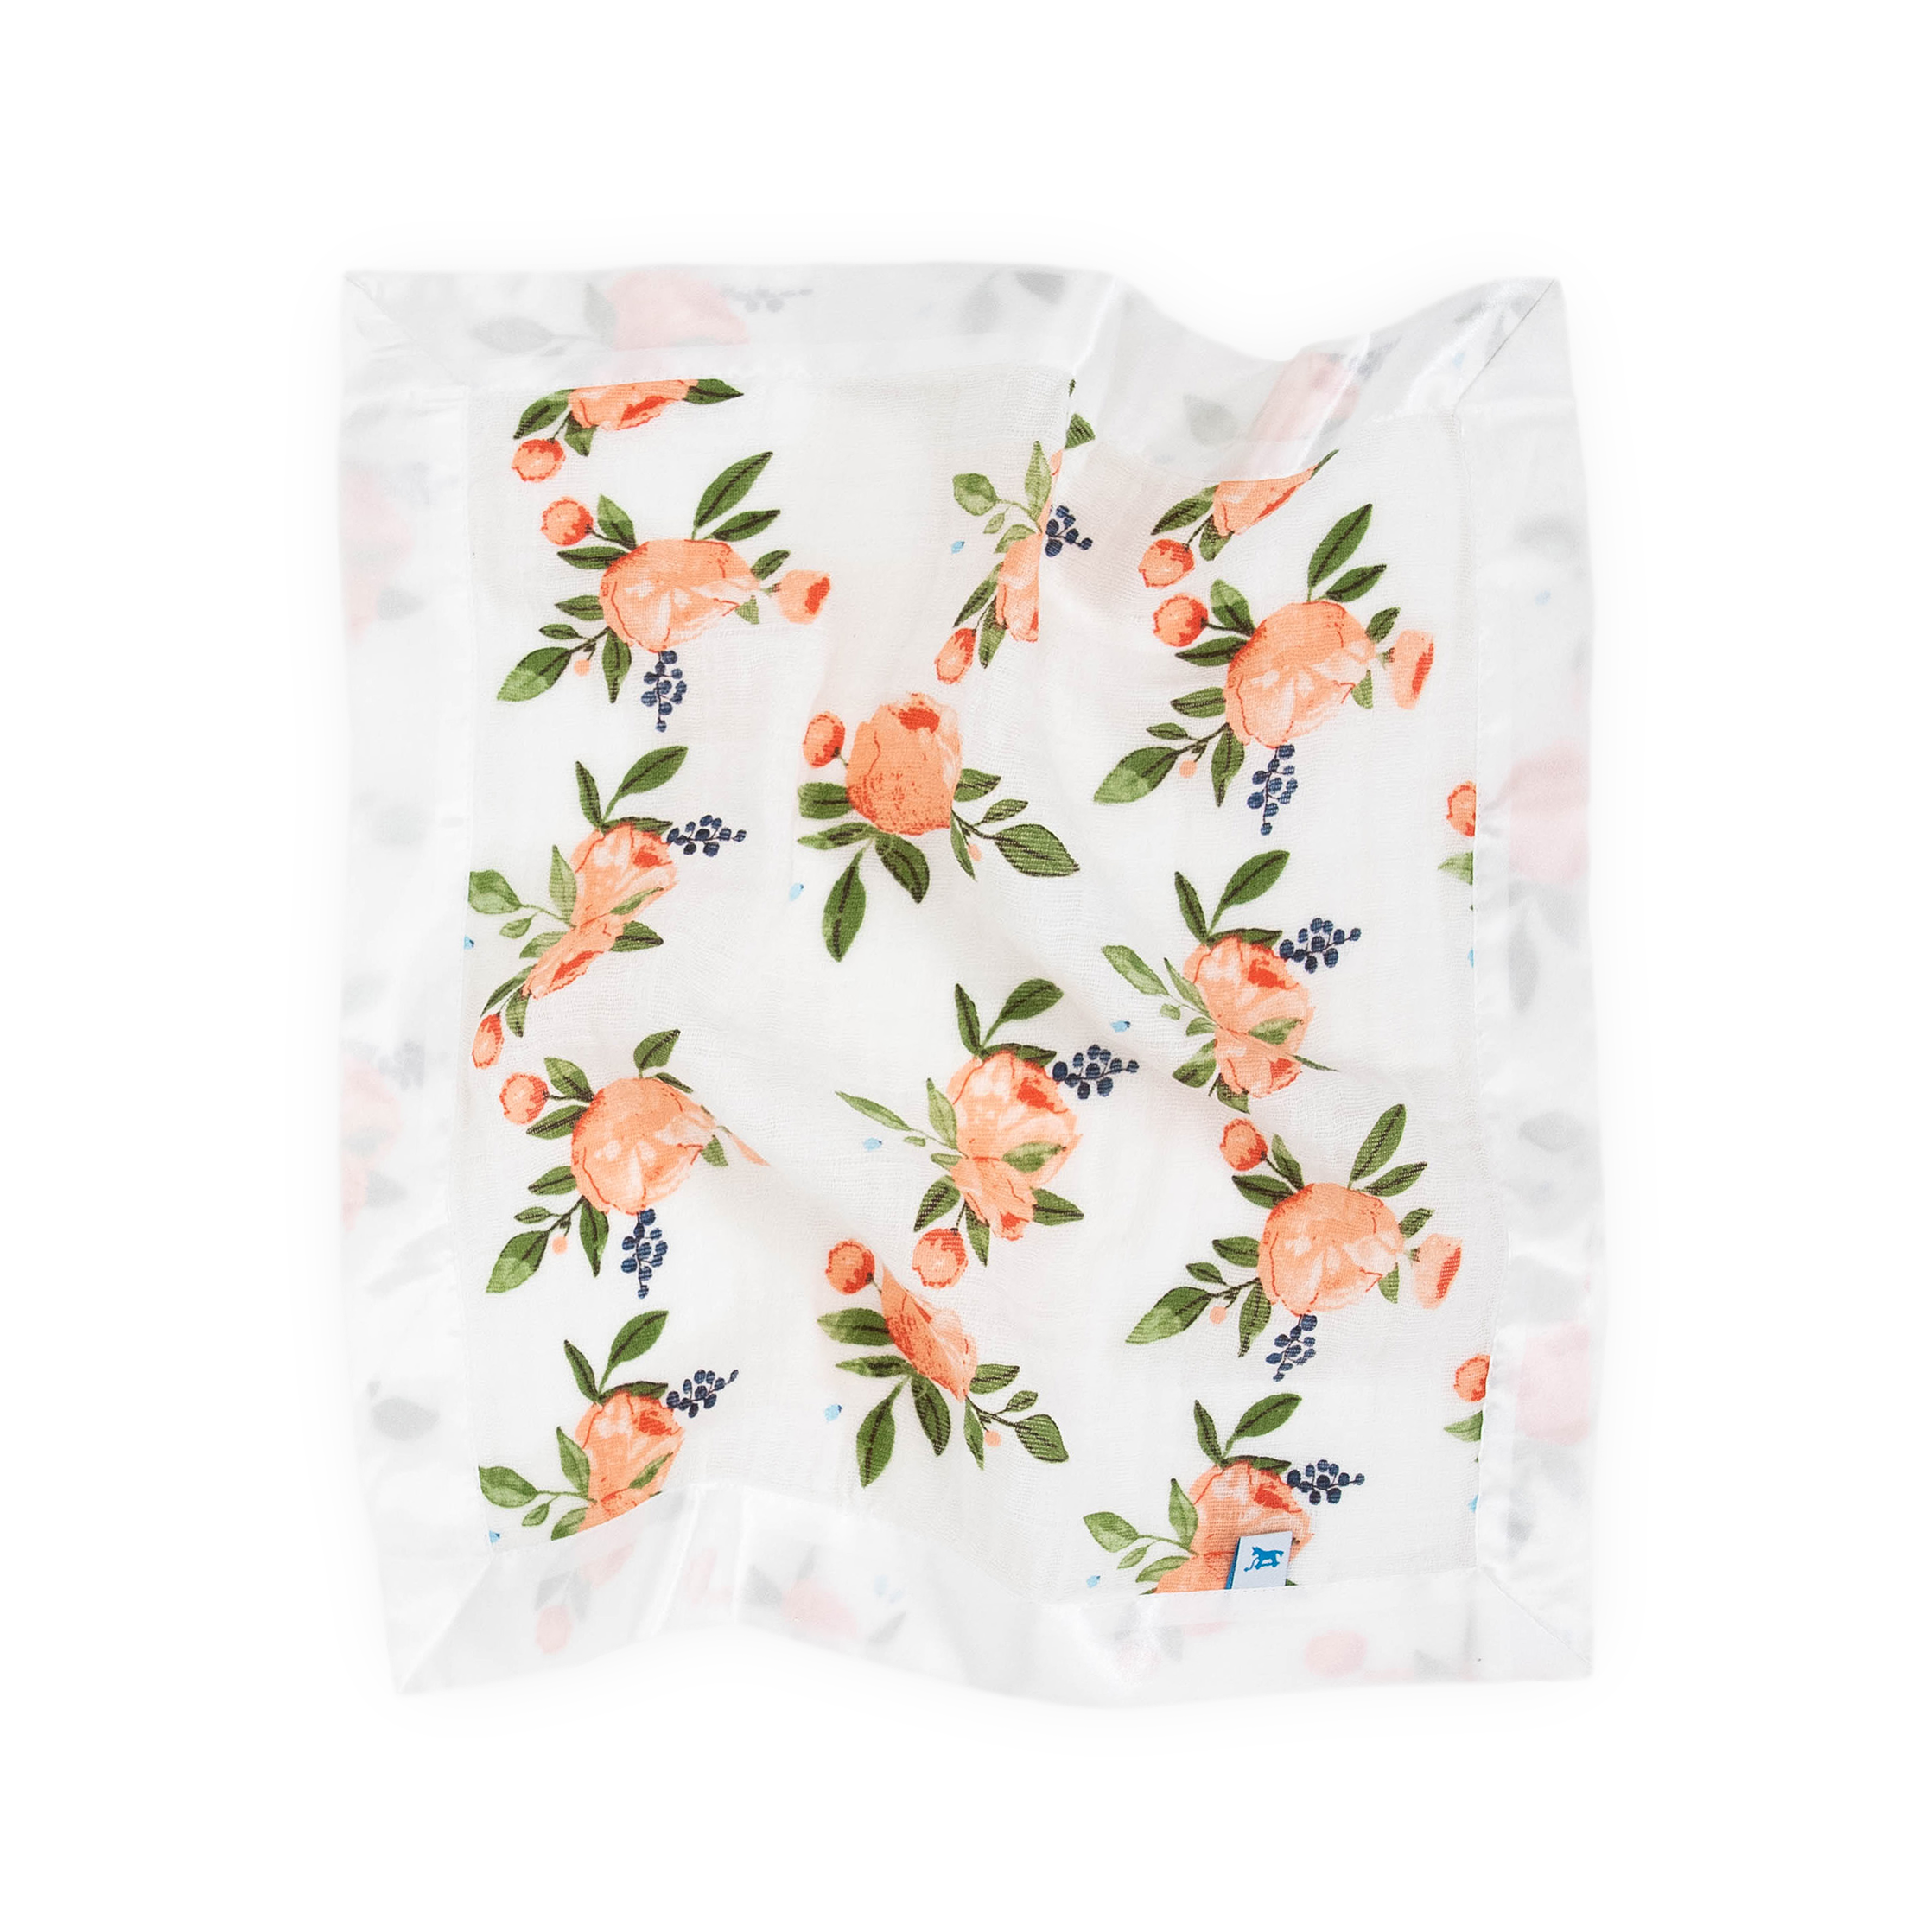 Cotton Muslin Security Blanket 3 Pack - Watercolor Roses